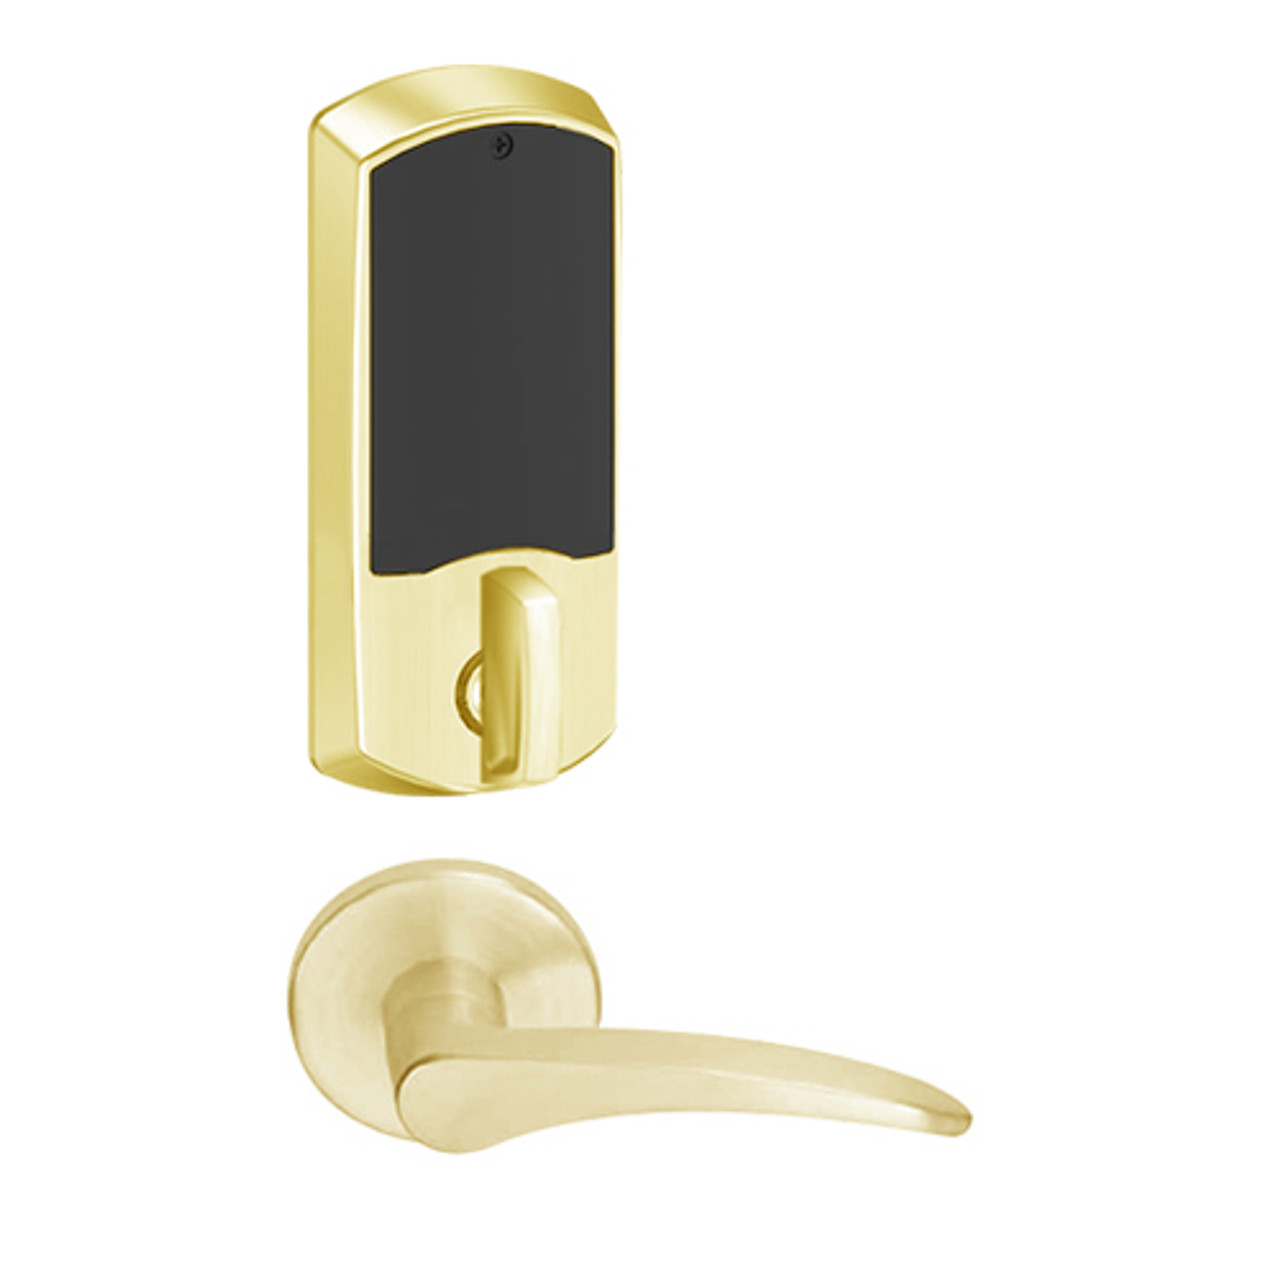 LEMD-GRW-BD-12-605-00B-RH Schlage Privacy/Apartment Wireless Greenwich Mortise Deadbolt Lock with LED and 12 Lever Prepped for SFIC in Bright Brass